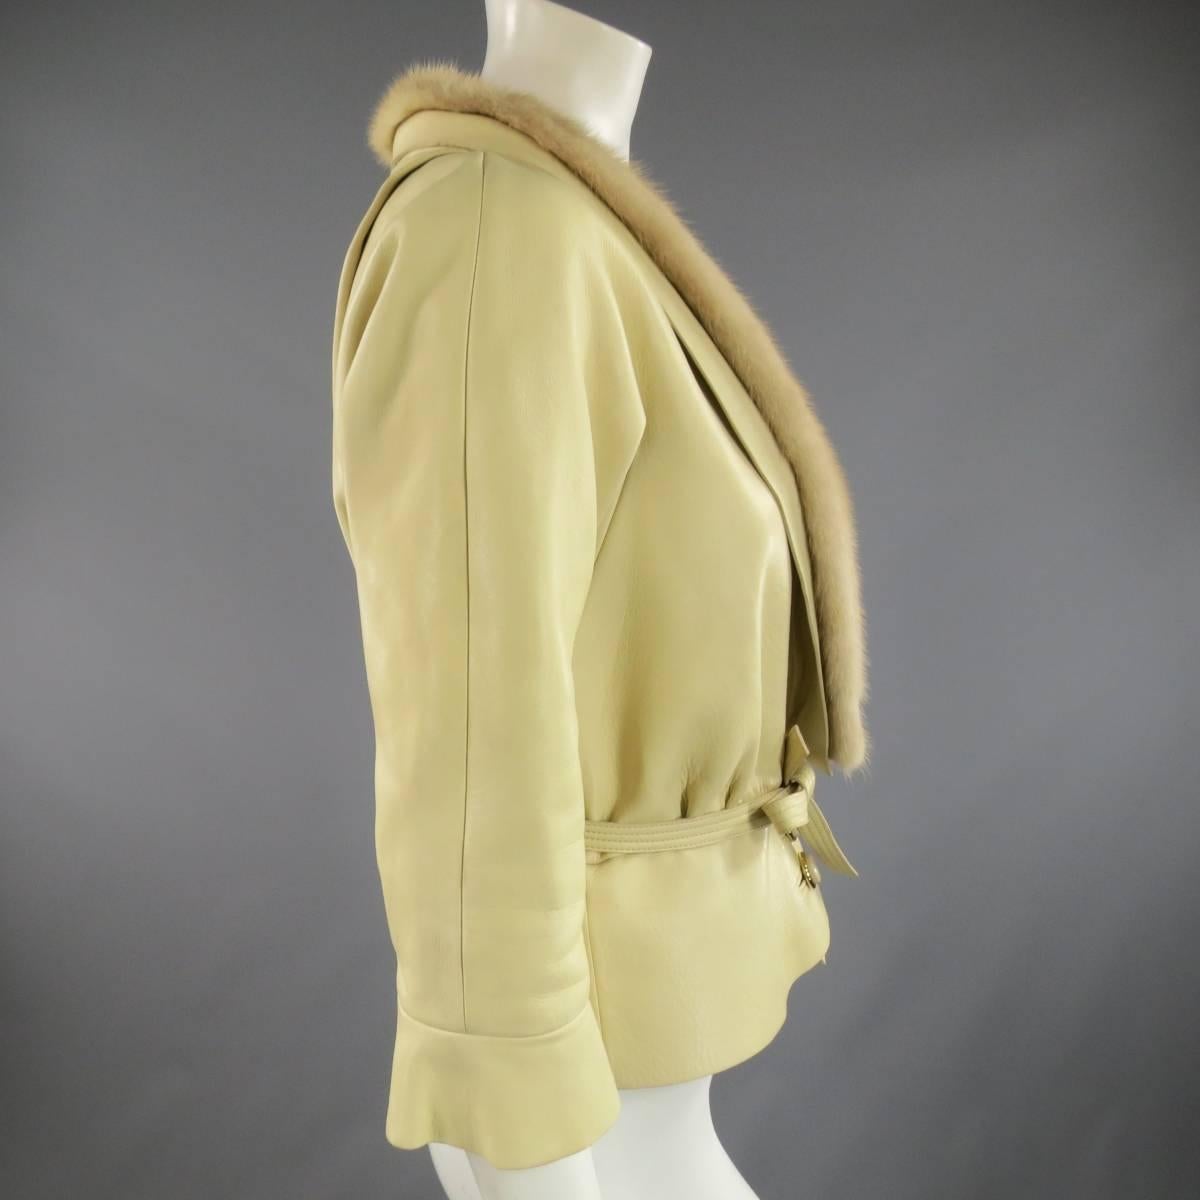 MARC JACOBS Size 6 Beige Leather Mink Collar Cropped Jacket 2